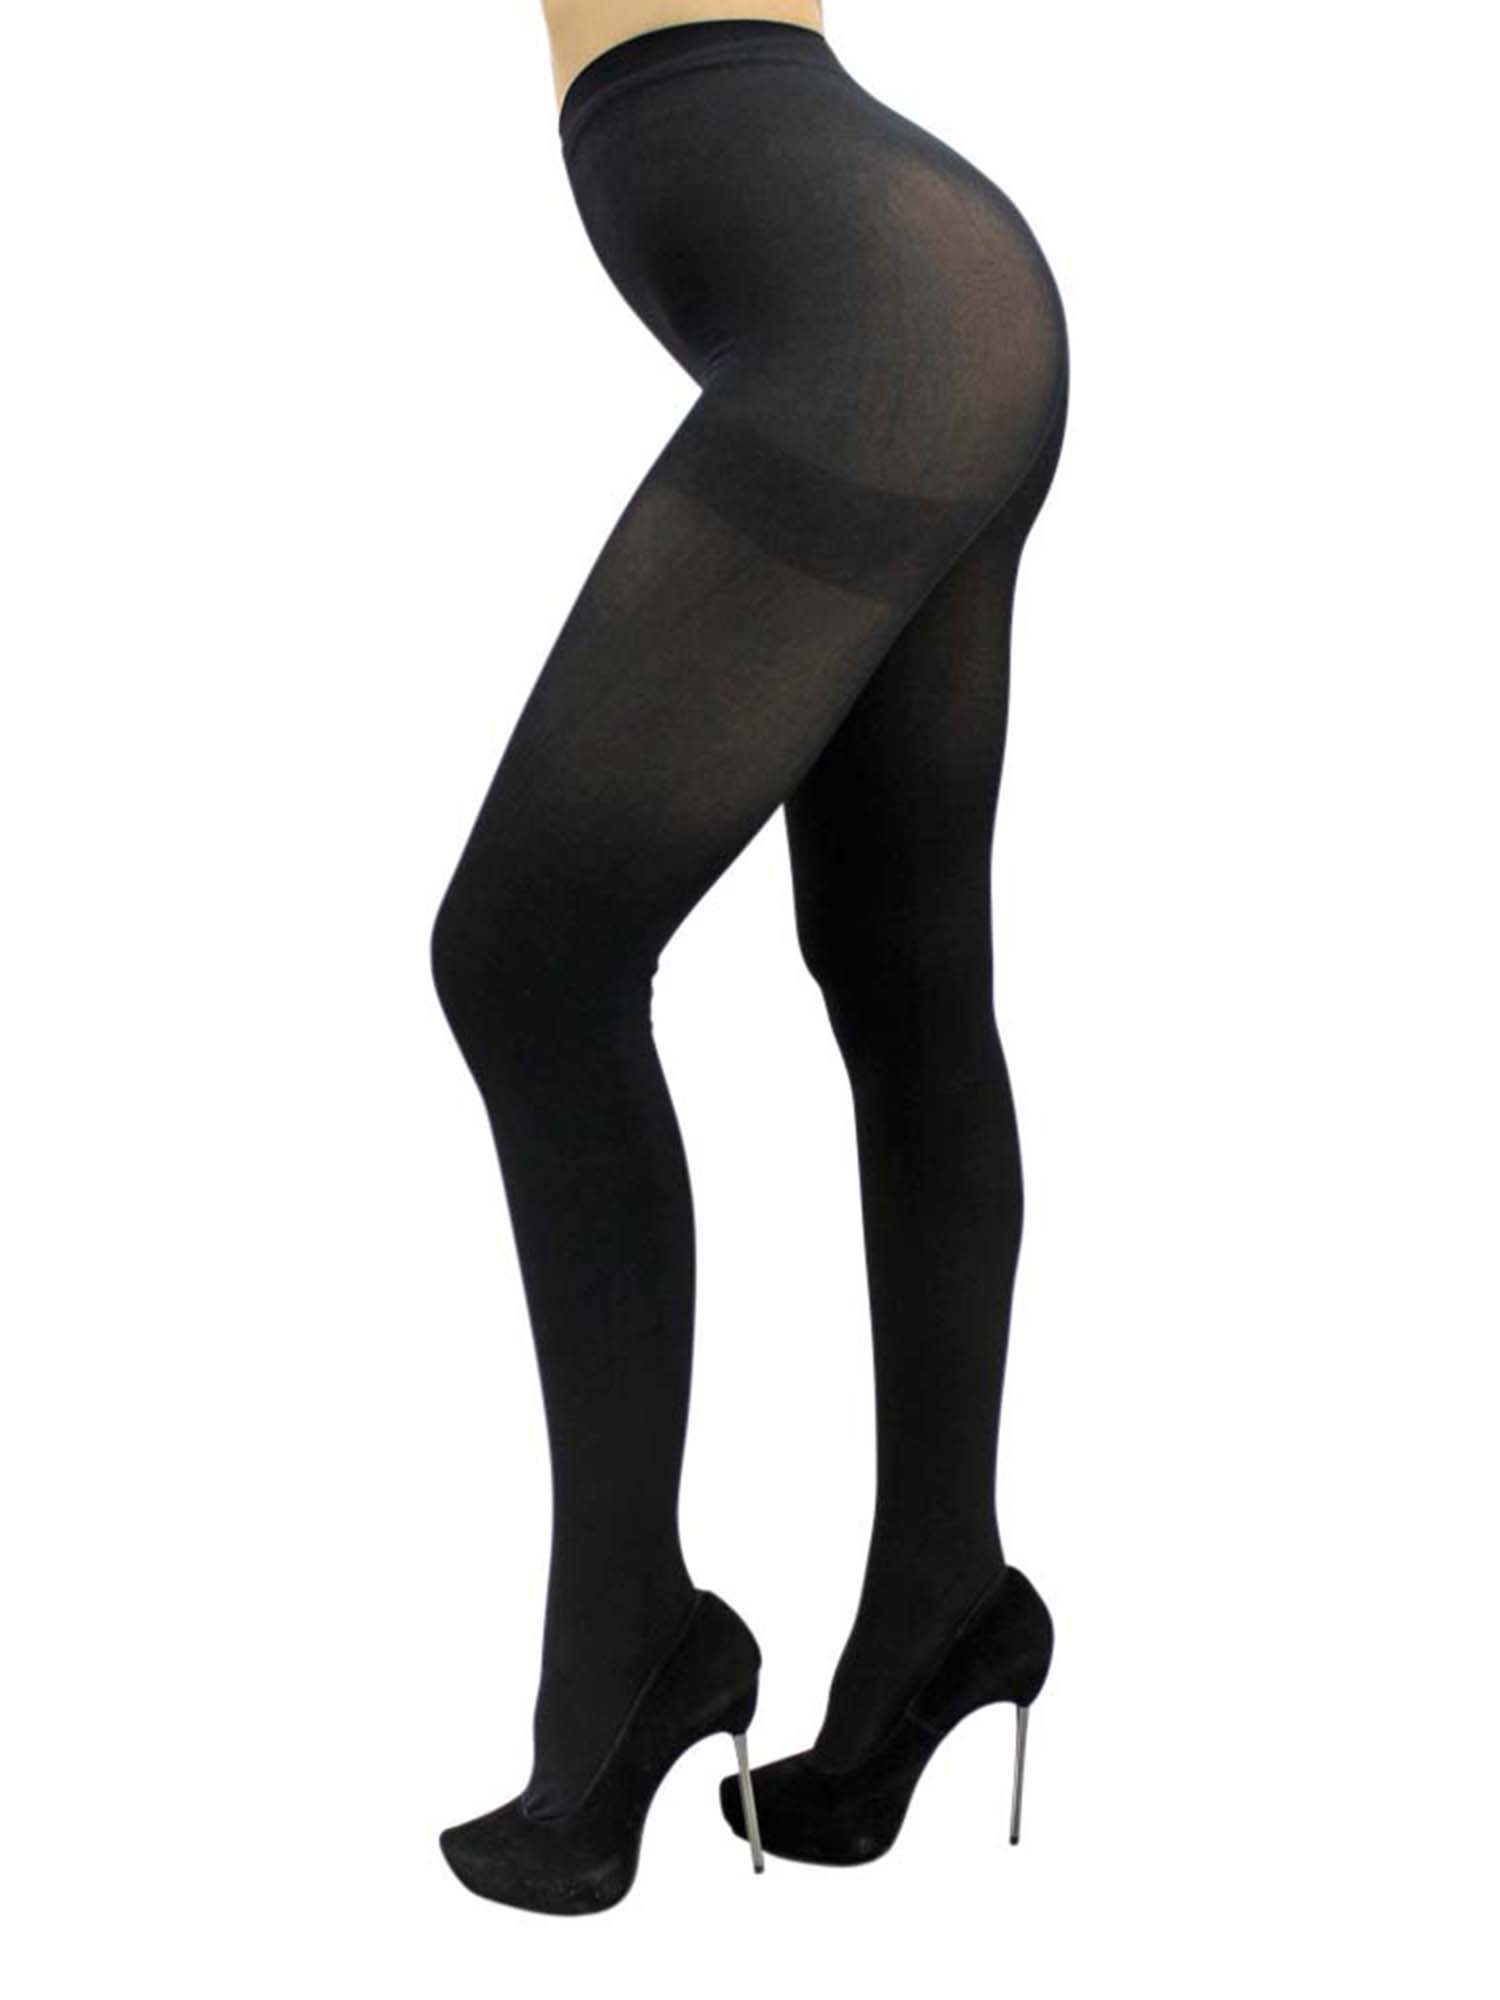 Opaque Black Stretchy Pantyhose Tights - image 2 of 3